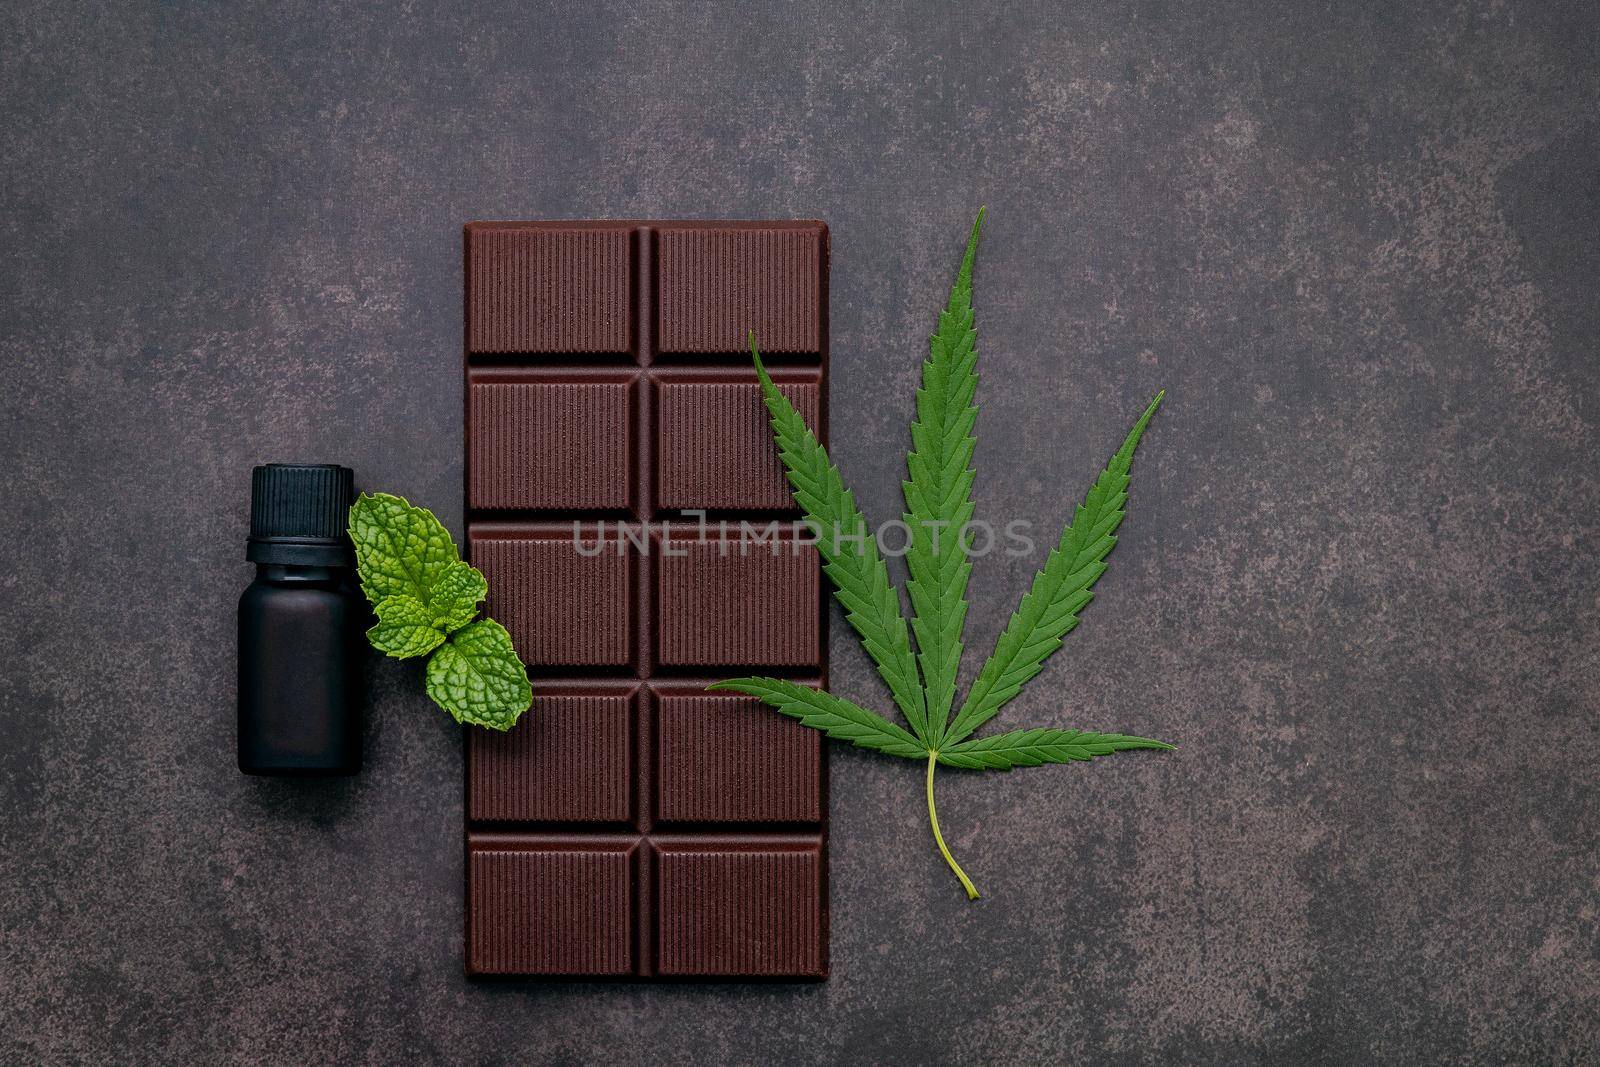 Food conceptual image of  cannabis leaf  with dark chocolate and fork on dark concrete background. by kerdkanno